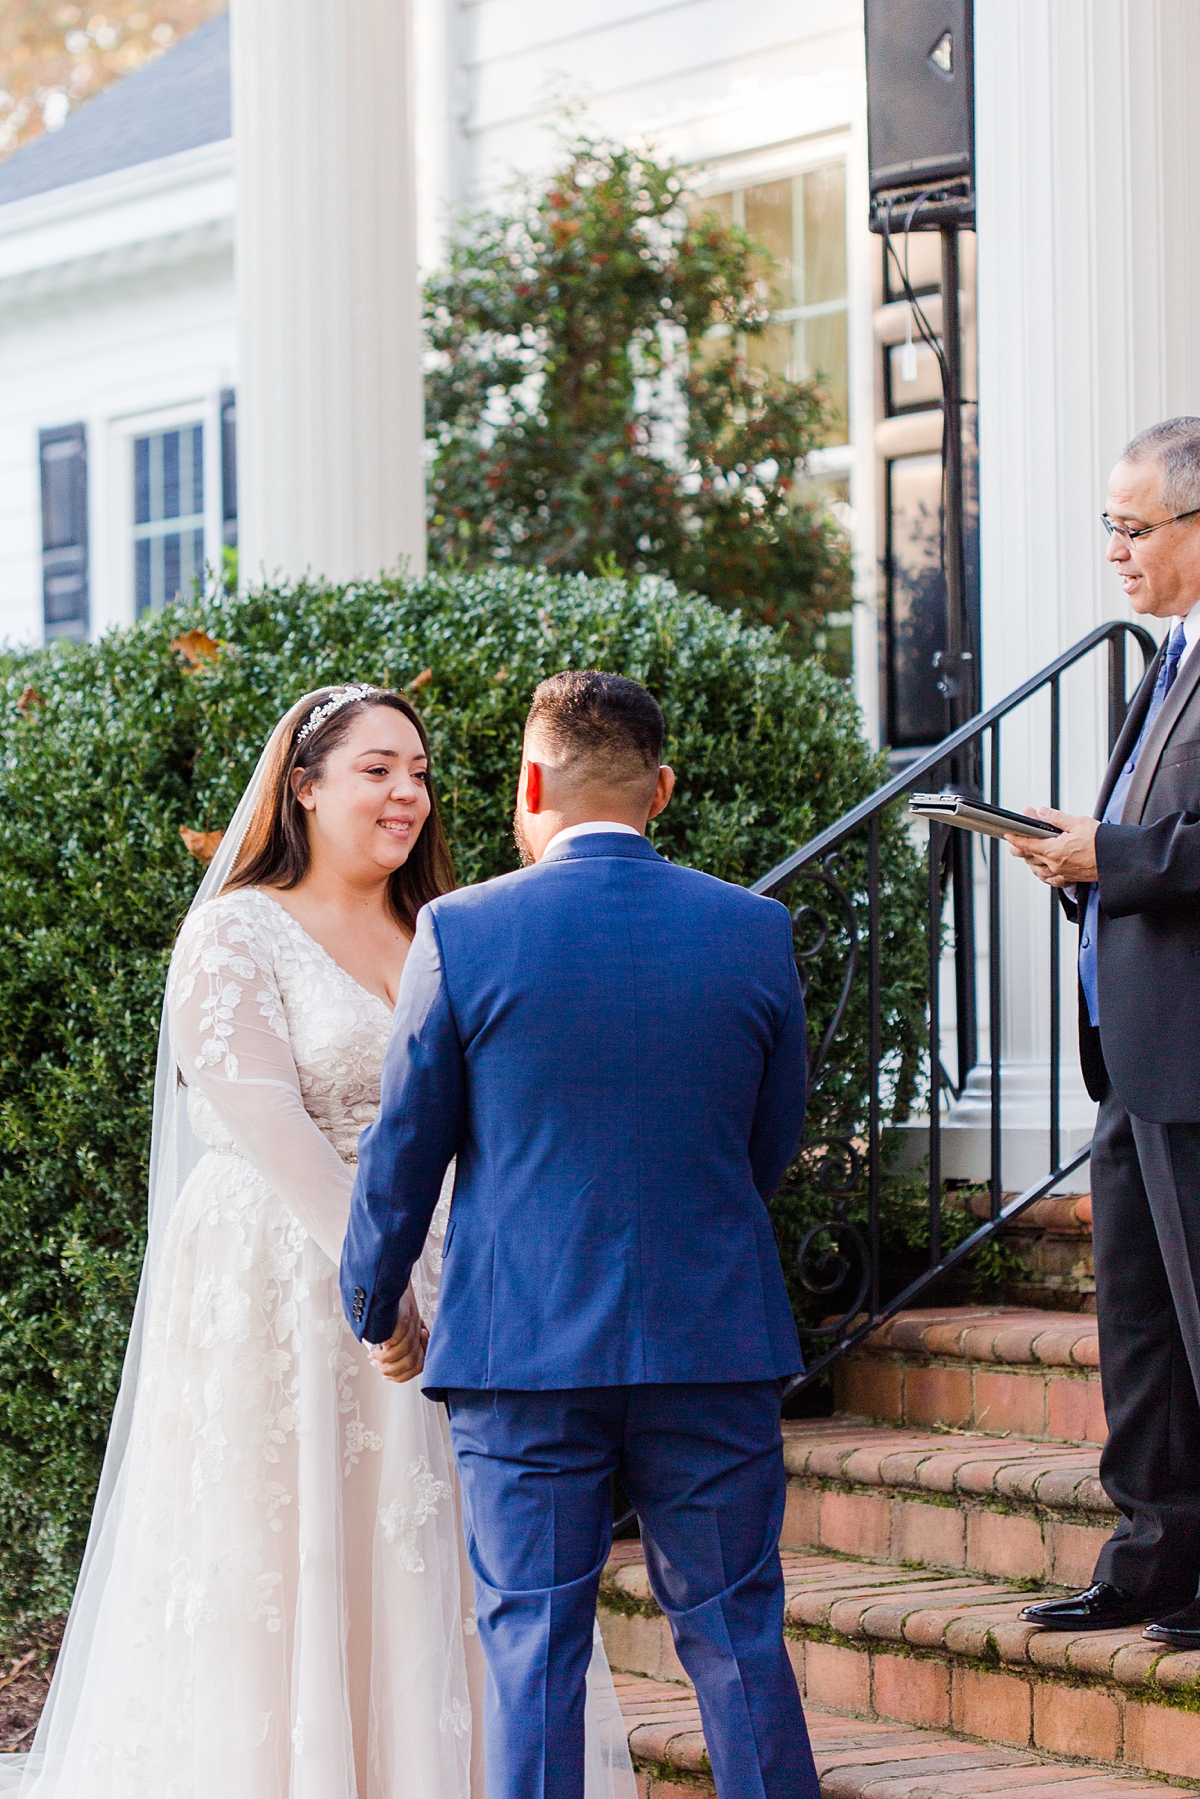 Bride and Groom During Ceremony at Virginia Cliffe Inn Wedding. Wedding Photography by Richmond Wedding Photographer Kailey Brianne Photography.